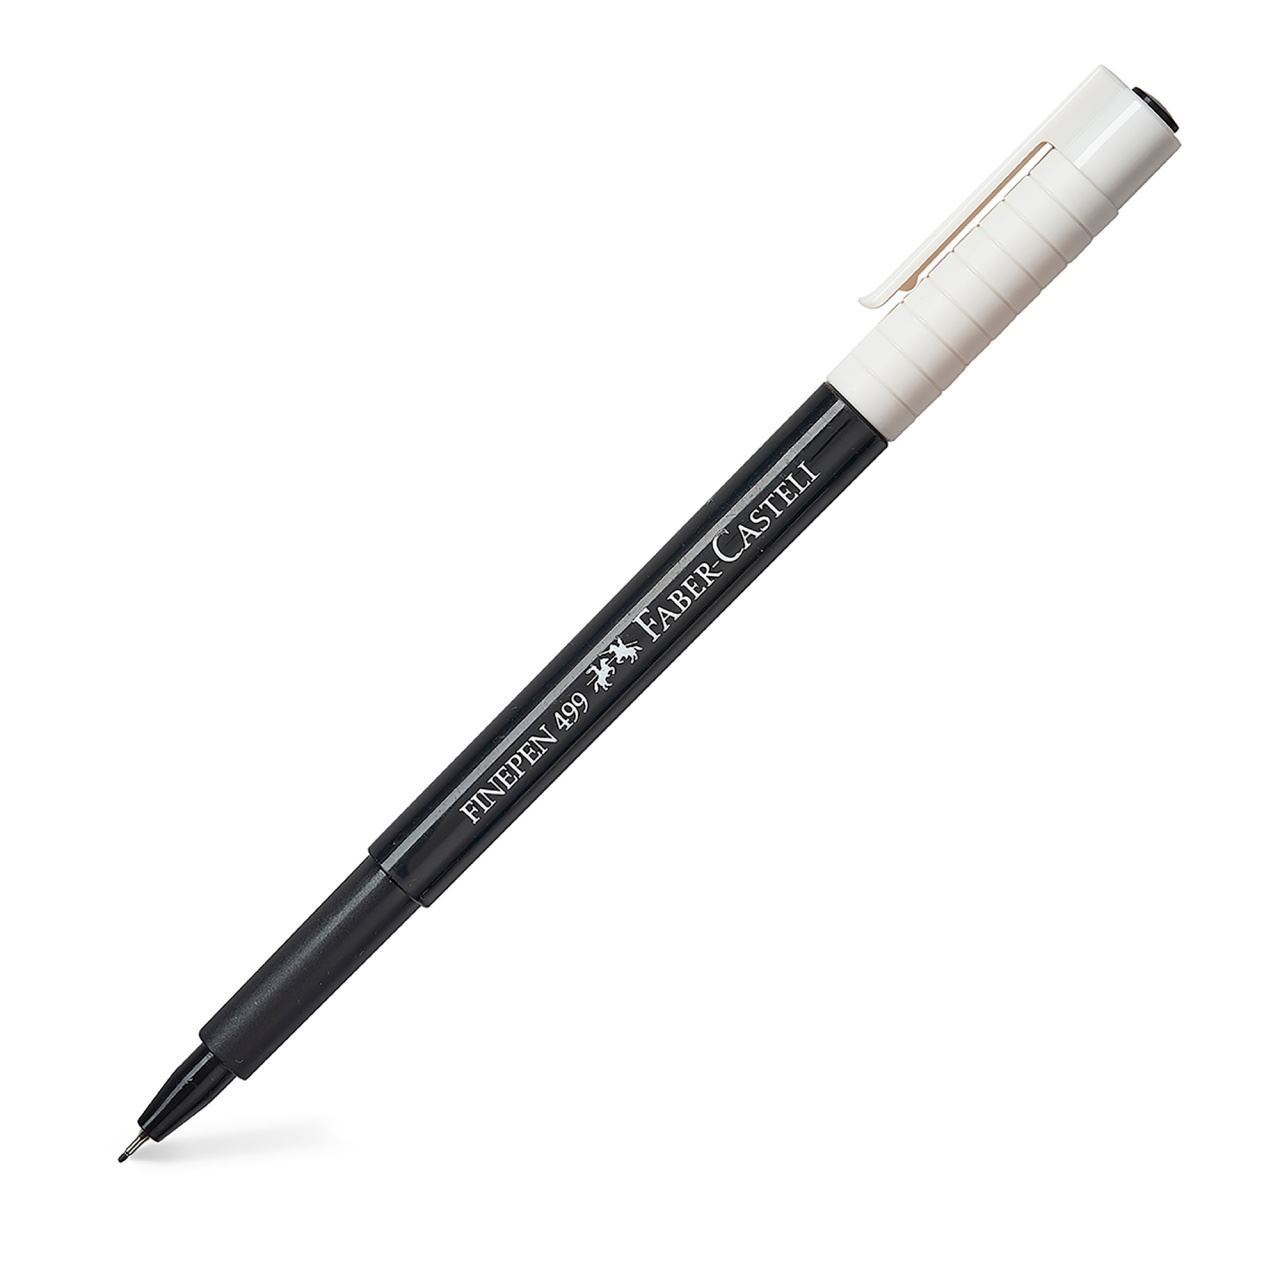 Faber-Castell - Rotulador Finepen 499 negro